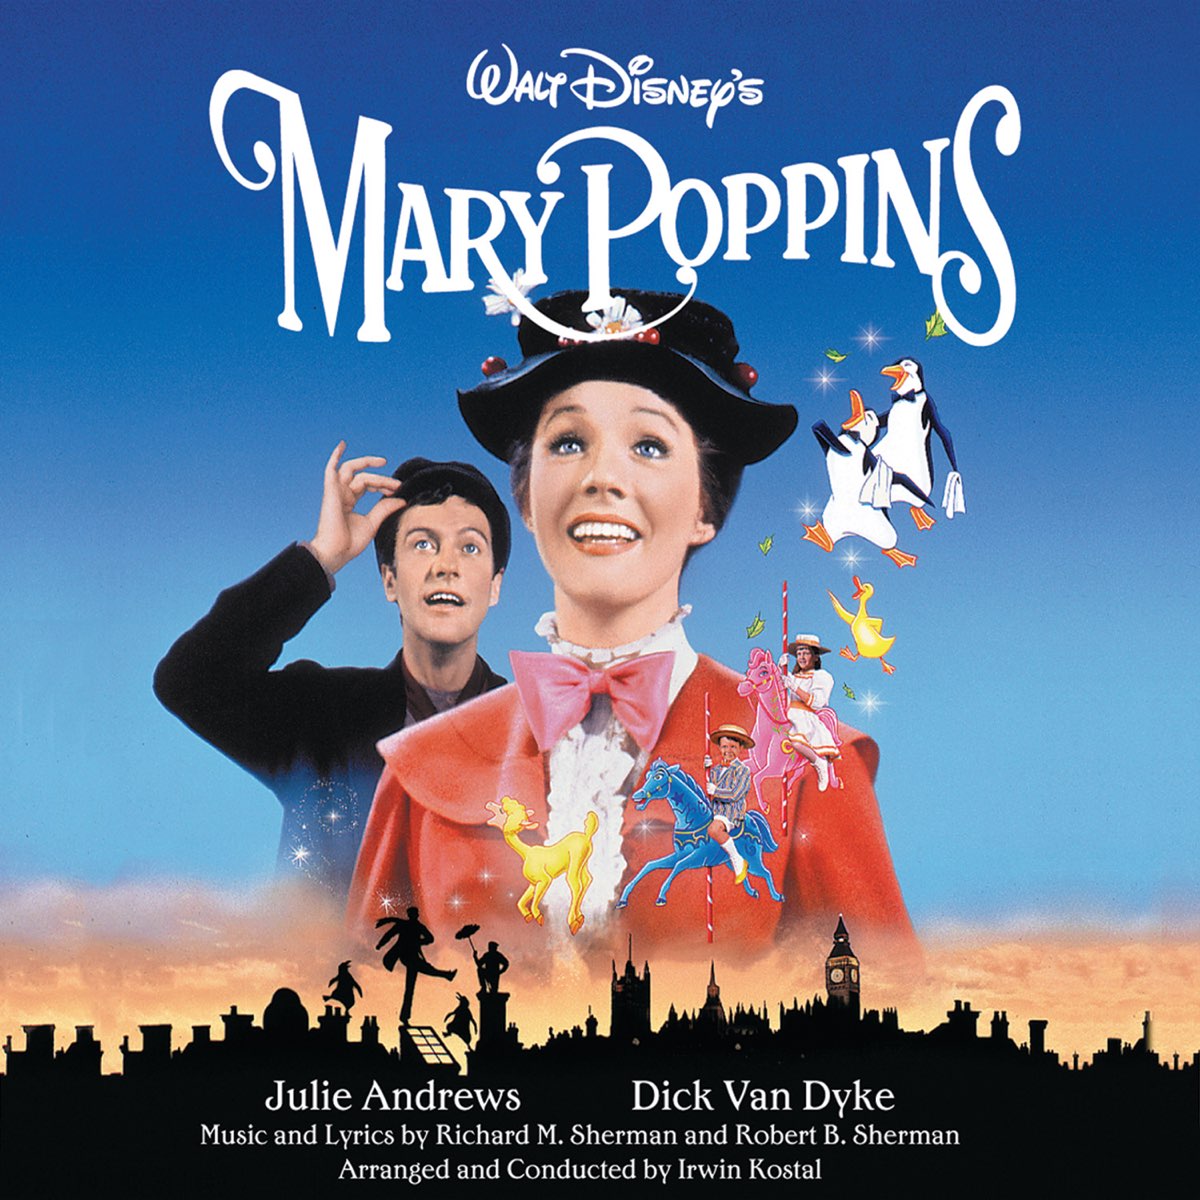 Mary Poppins (Original Motion Picture Soundtrack) - Album by The Sherman  Brothers, Julie Andrews, Dick Van Dyke & Irwin Kostal - Apple Music